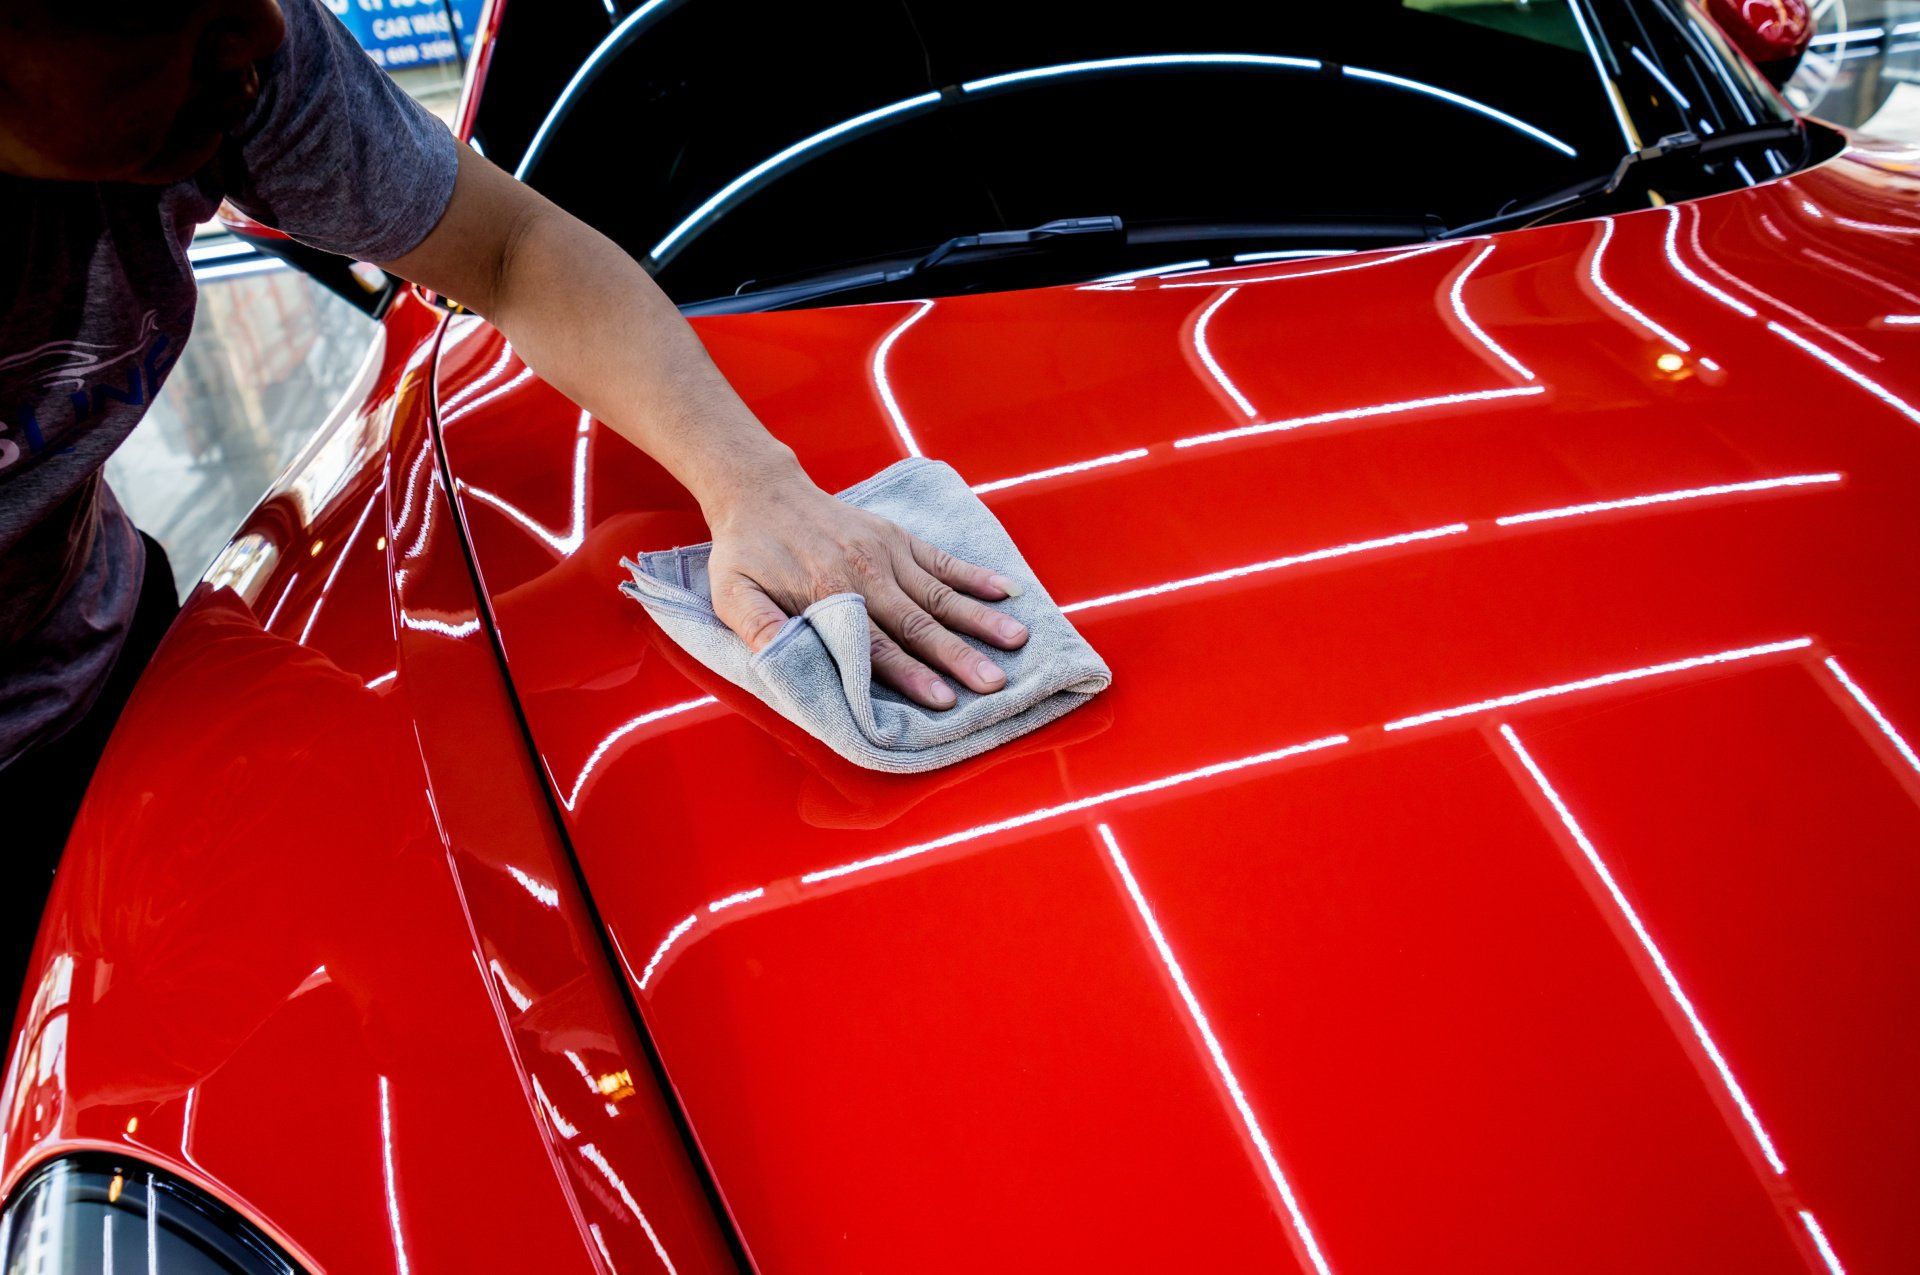 Polishing your car to perfection